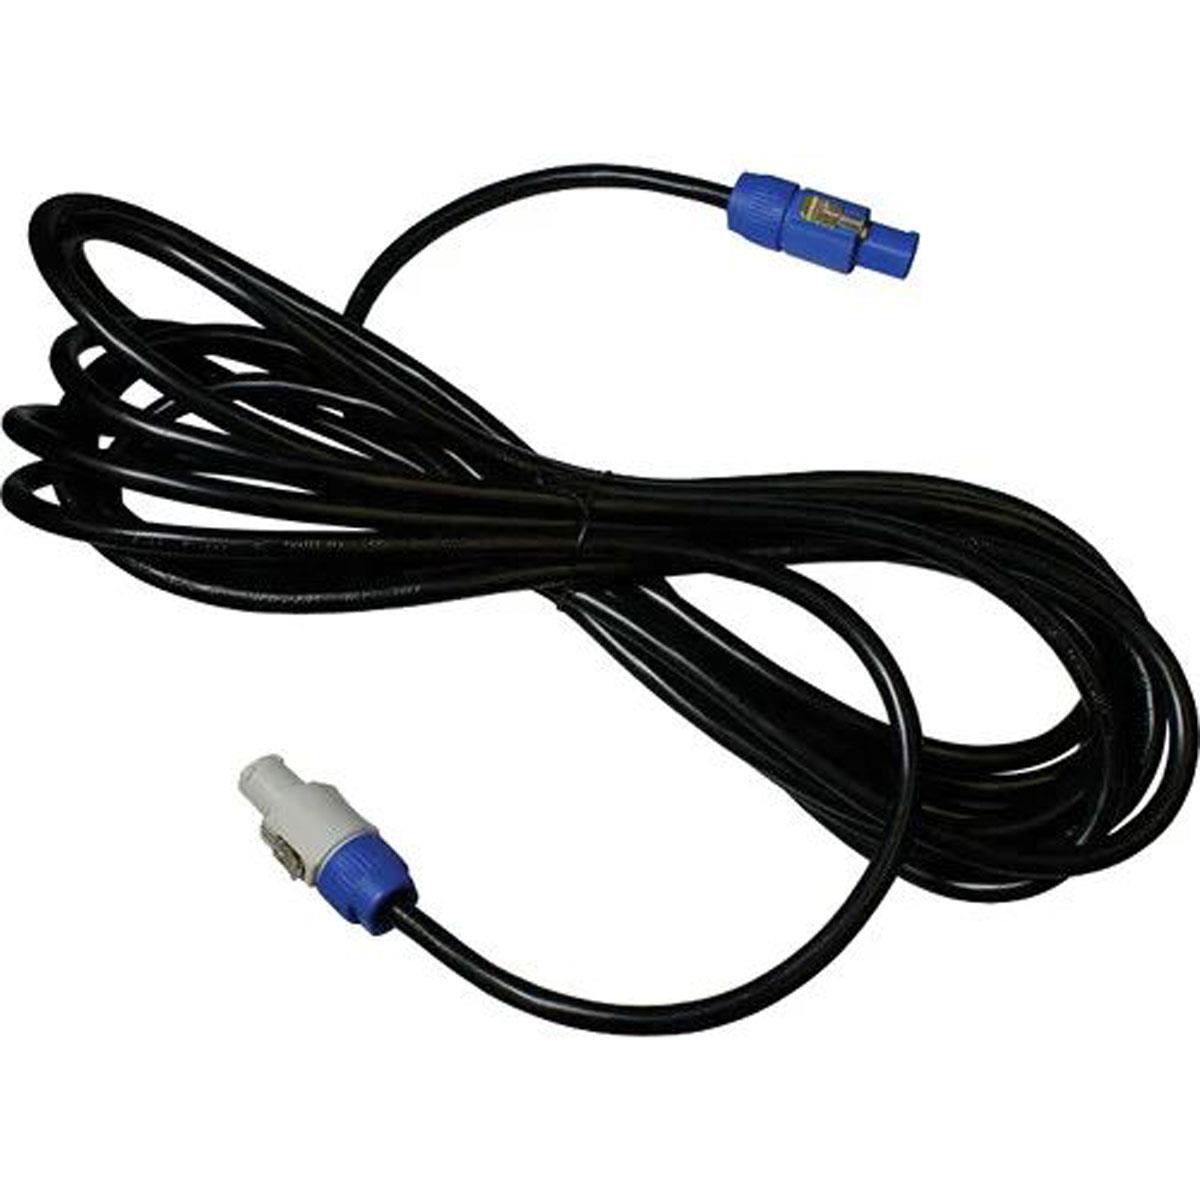 Image of Blizzard Lighting Cool Cable 25' powerCON Male-Blue to Male-White Cable